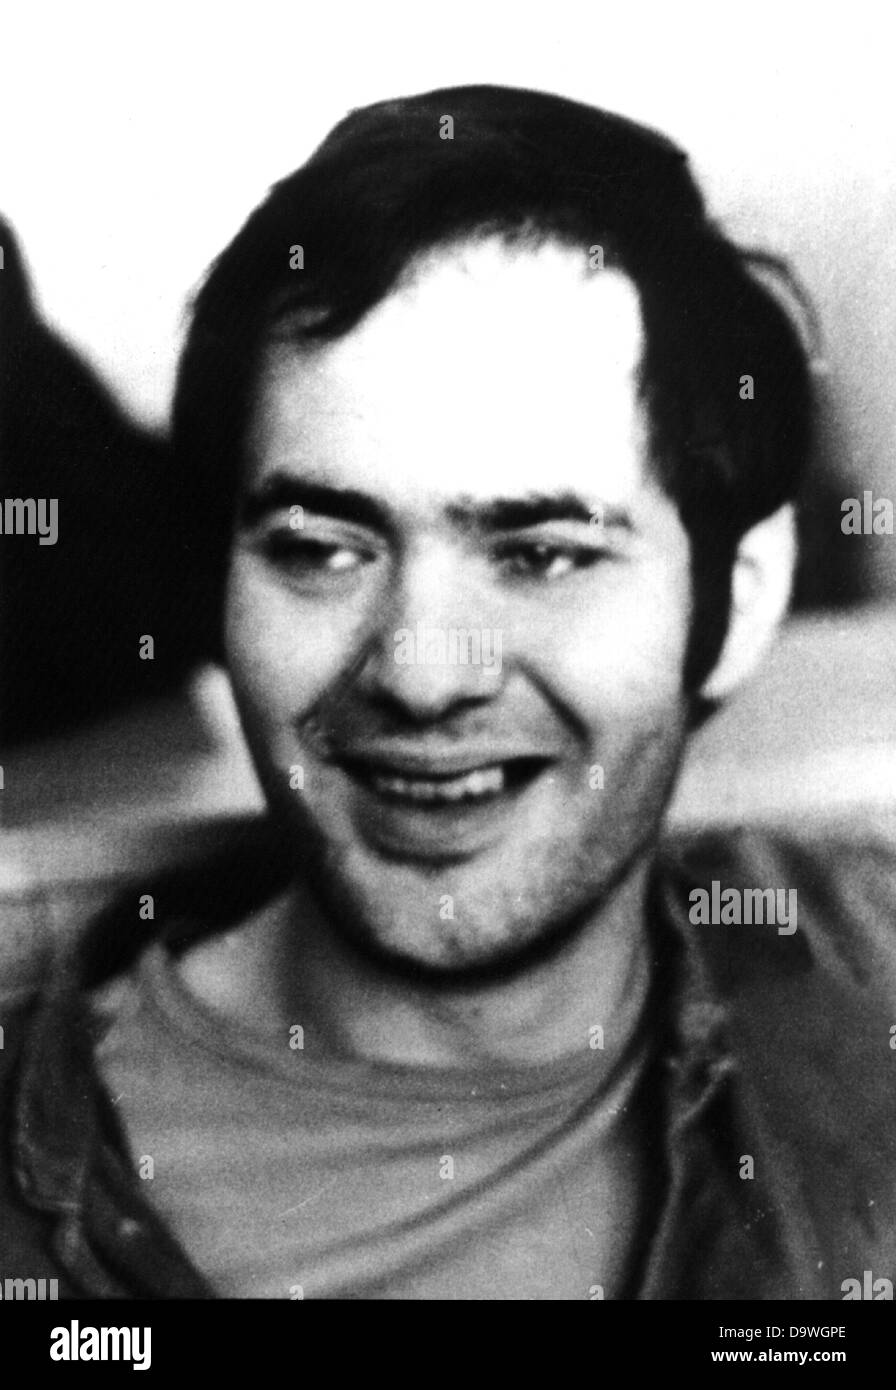 RAF terrorist of the first generation: Andras Baader (undated picture). The trial against RAF terrorists Andreas Baader, Ulrike Meinhof, Gudrun Ensslin and Jan-Carl Raspe started on the 21st of March in 1975. Stock Photo